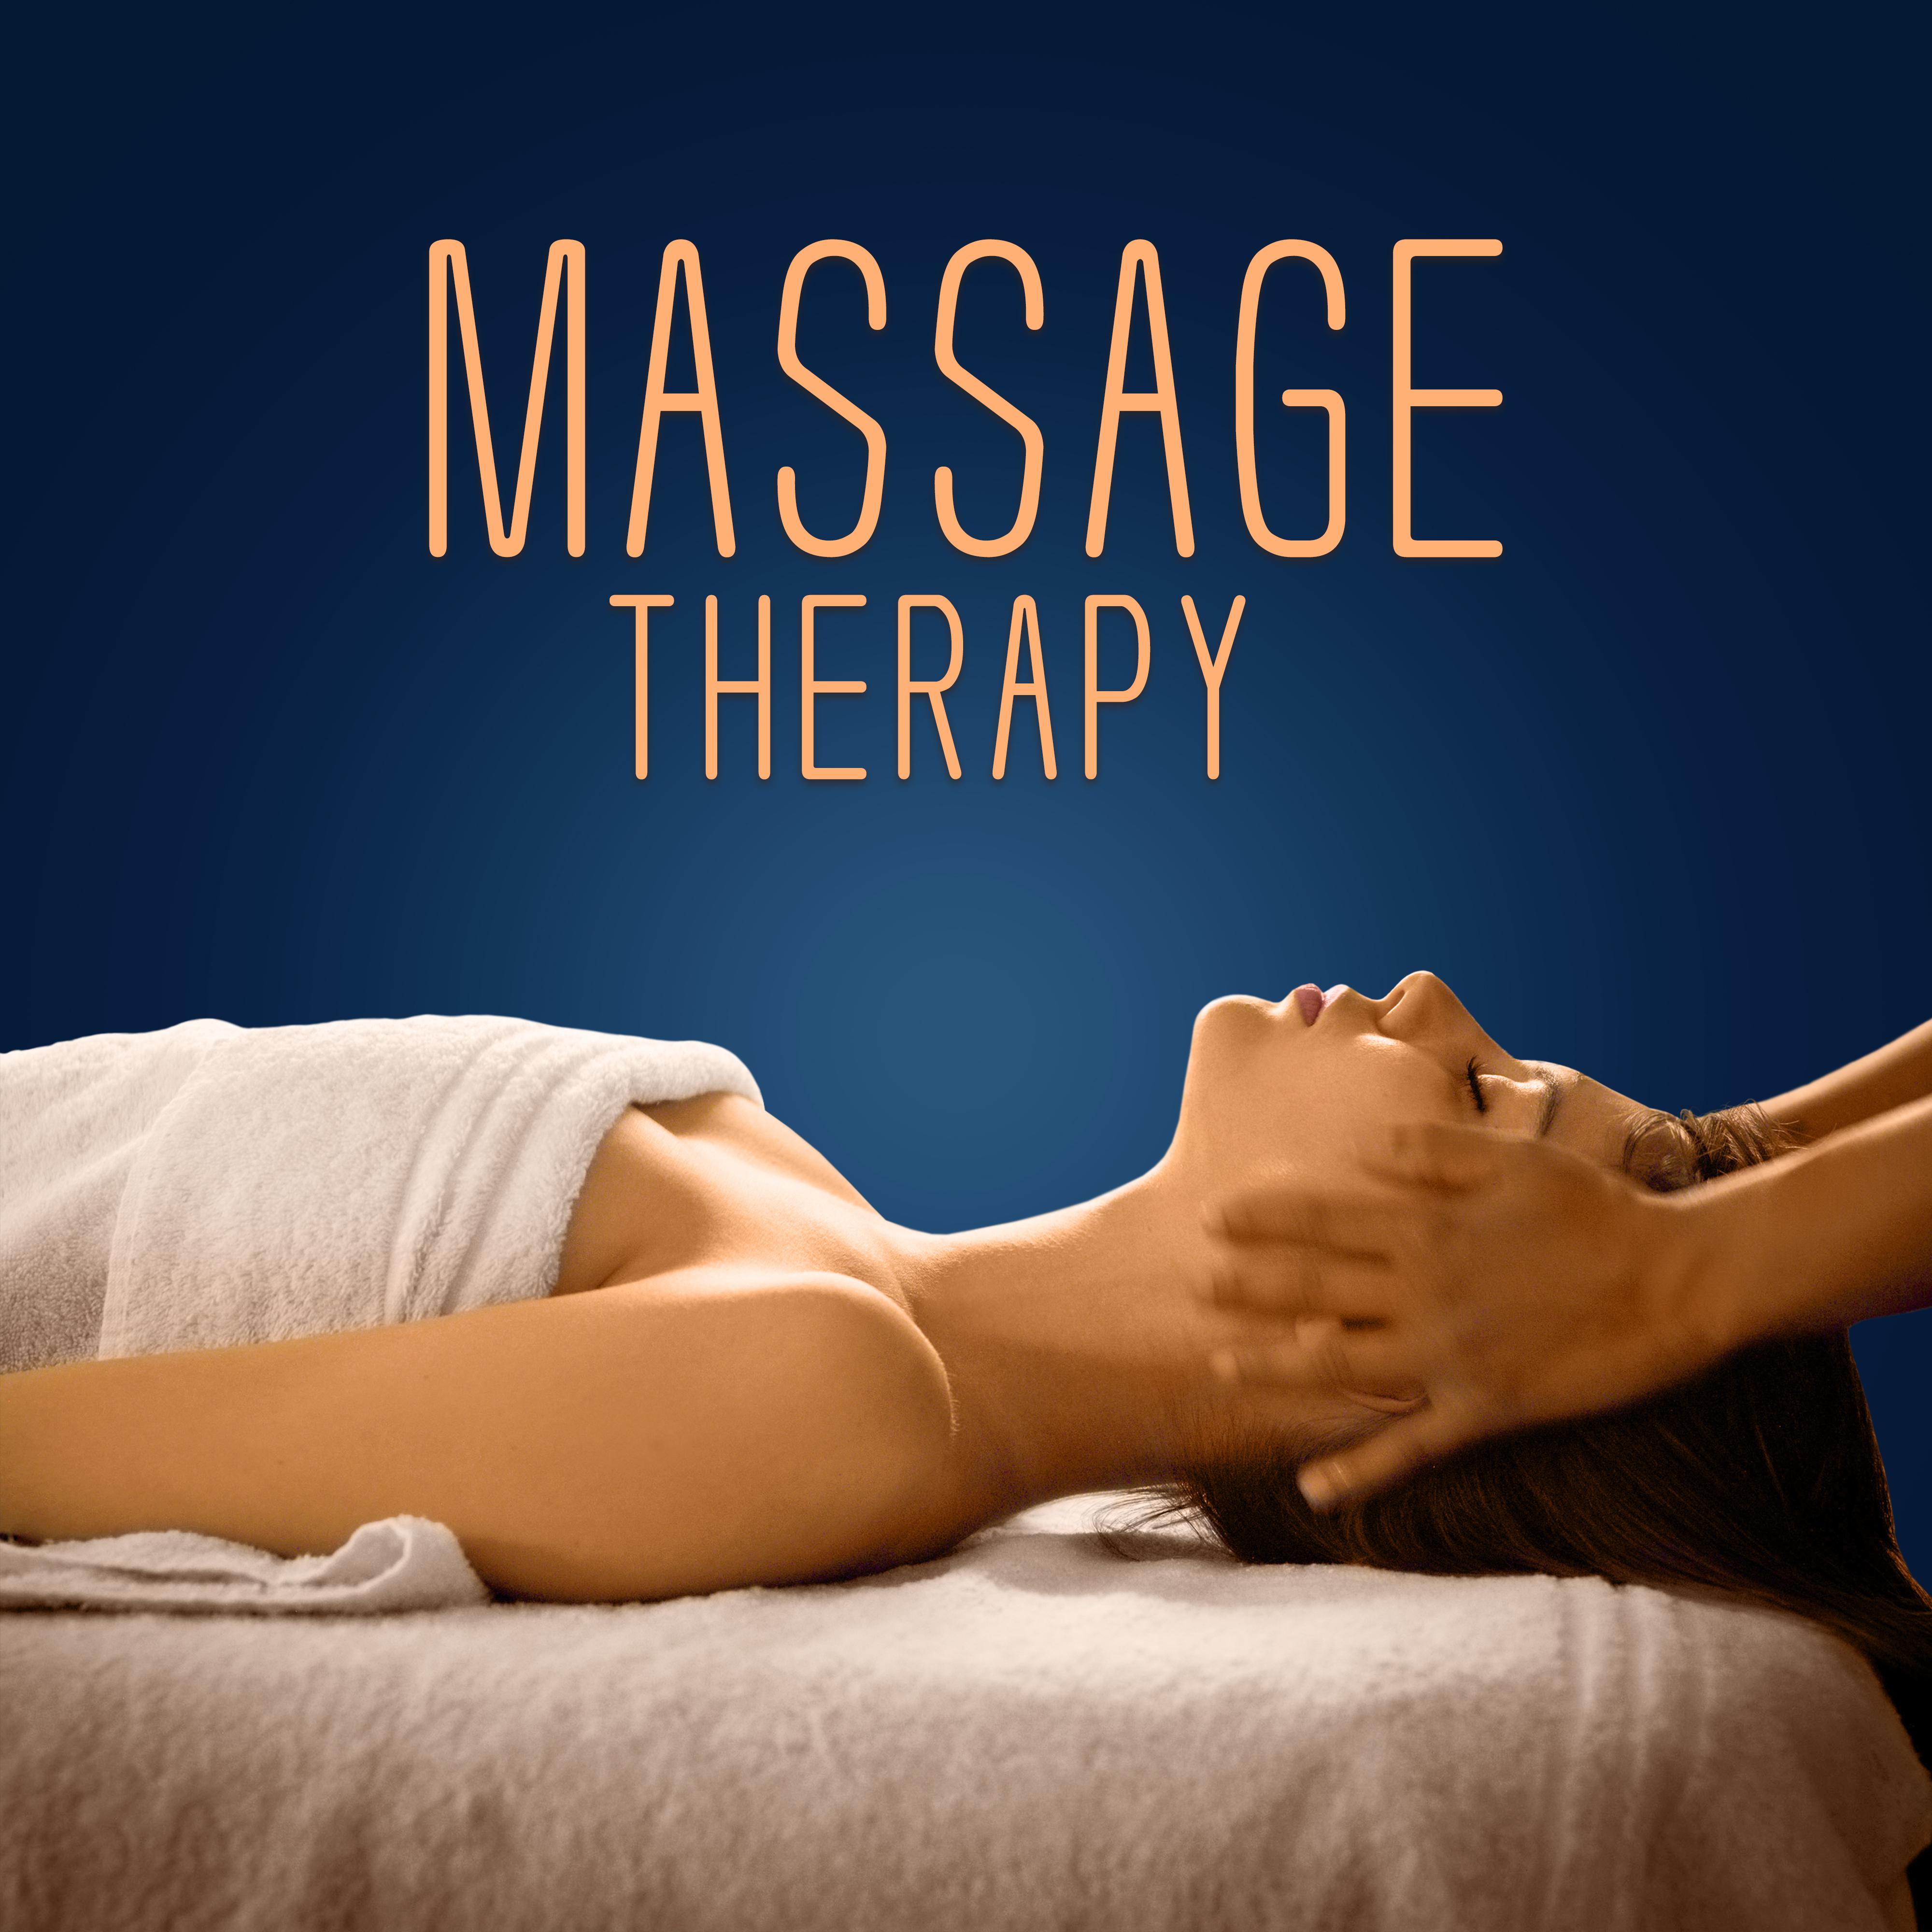 Massage Therapy  Zen Sounds, Healing Nature for Relax, Spa Music, Singing Birds, Soothing Rain